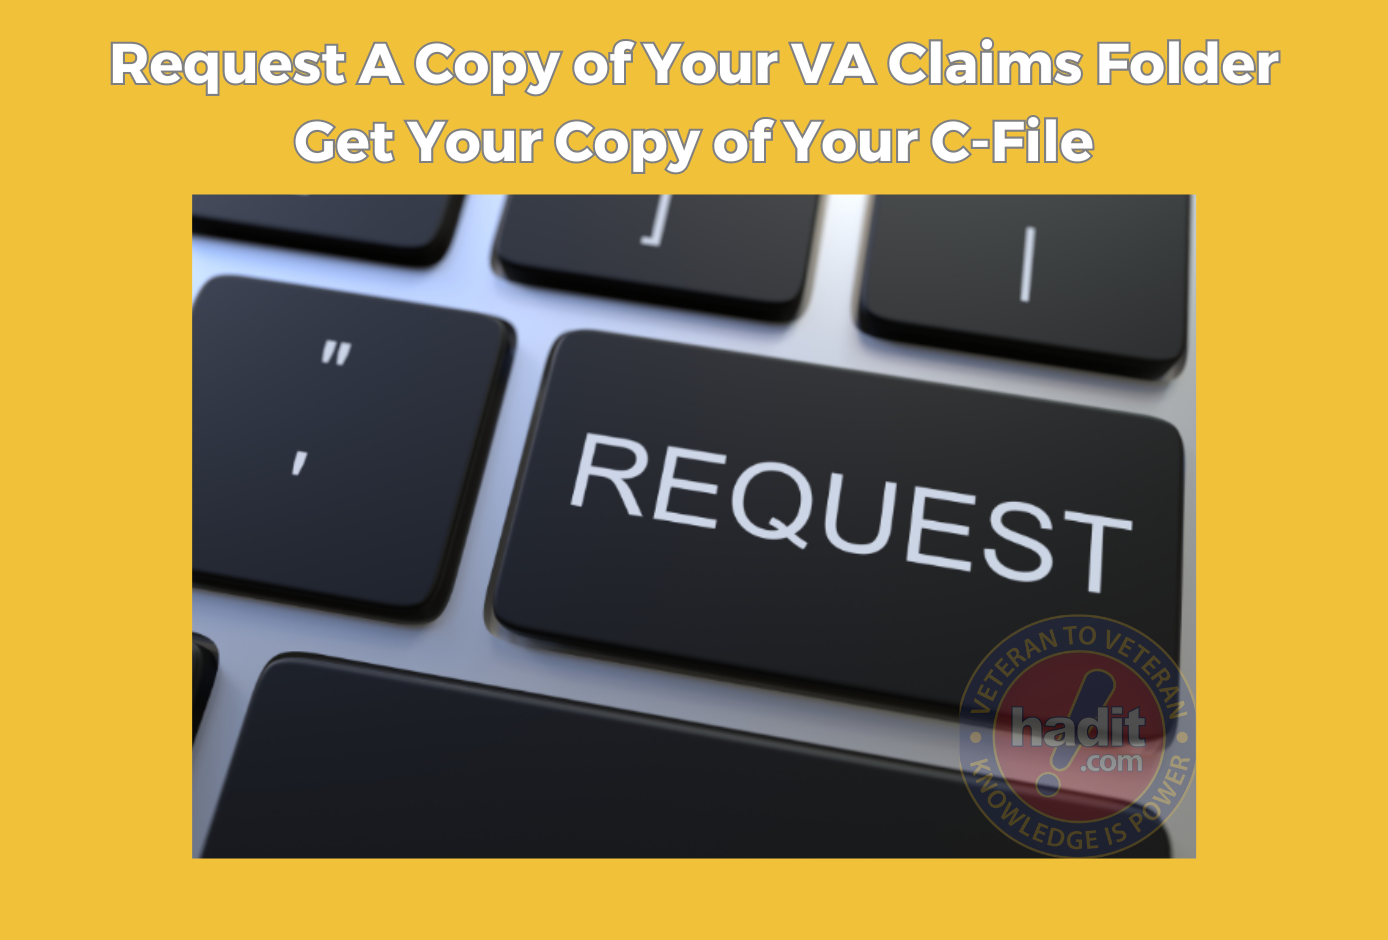 An image featuring a close-up of a computer keyboard with a prominent black key labeled "REQUEST" in the center. The background is yellow with text stating "Request A Copy of Your VA Claims Folder Get Your Copy of Your C-File" and the logo for "hadit.com Veteran to Veteran" with the tagline "Knowledge Is Power" in the lower right corner.